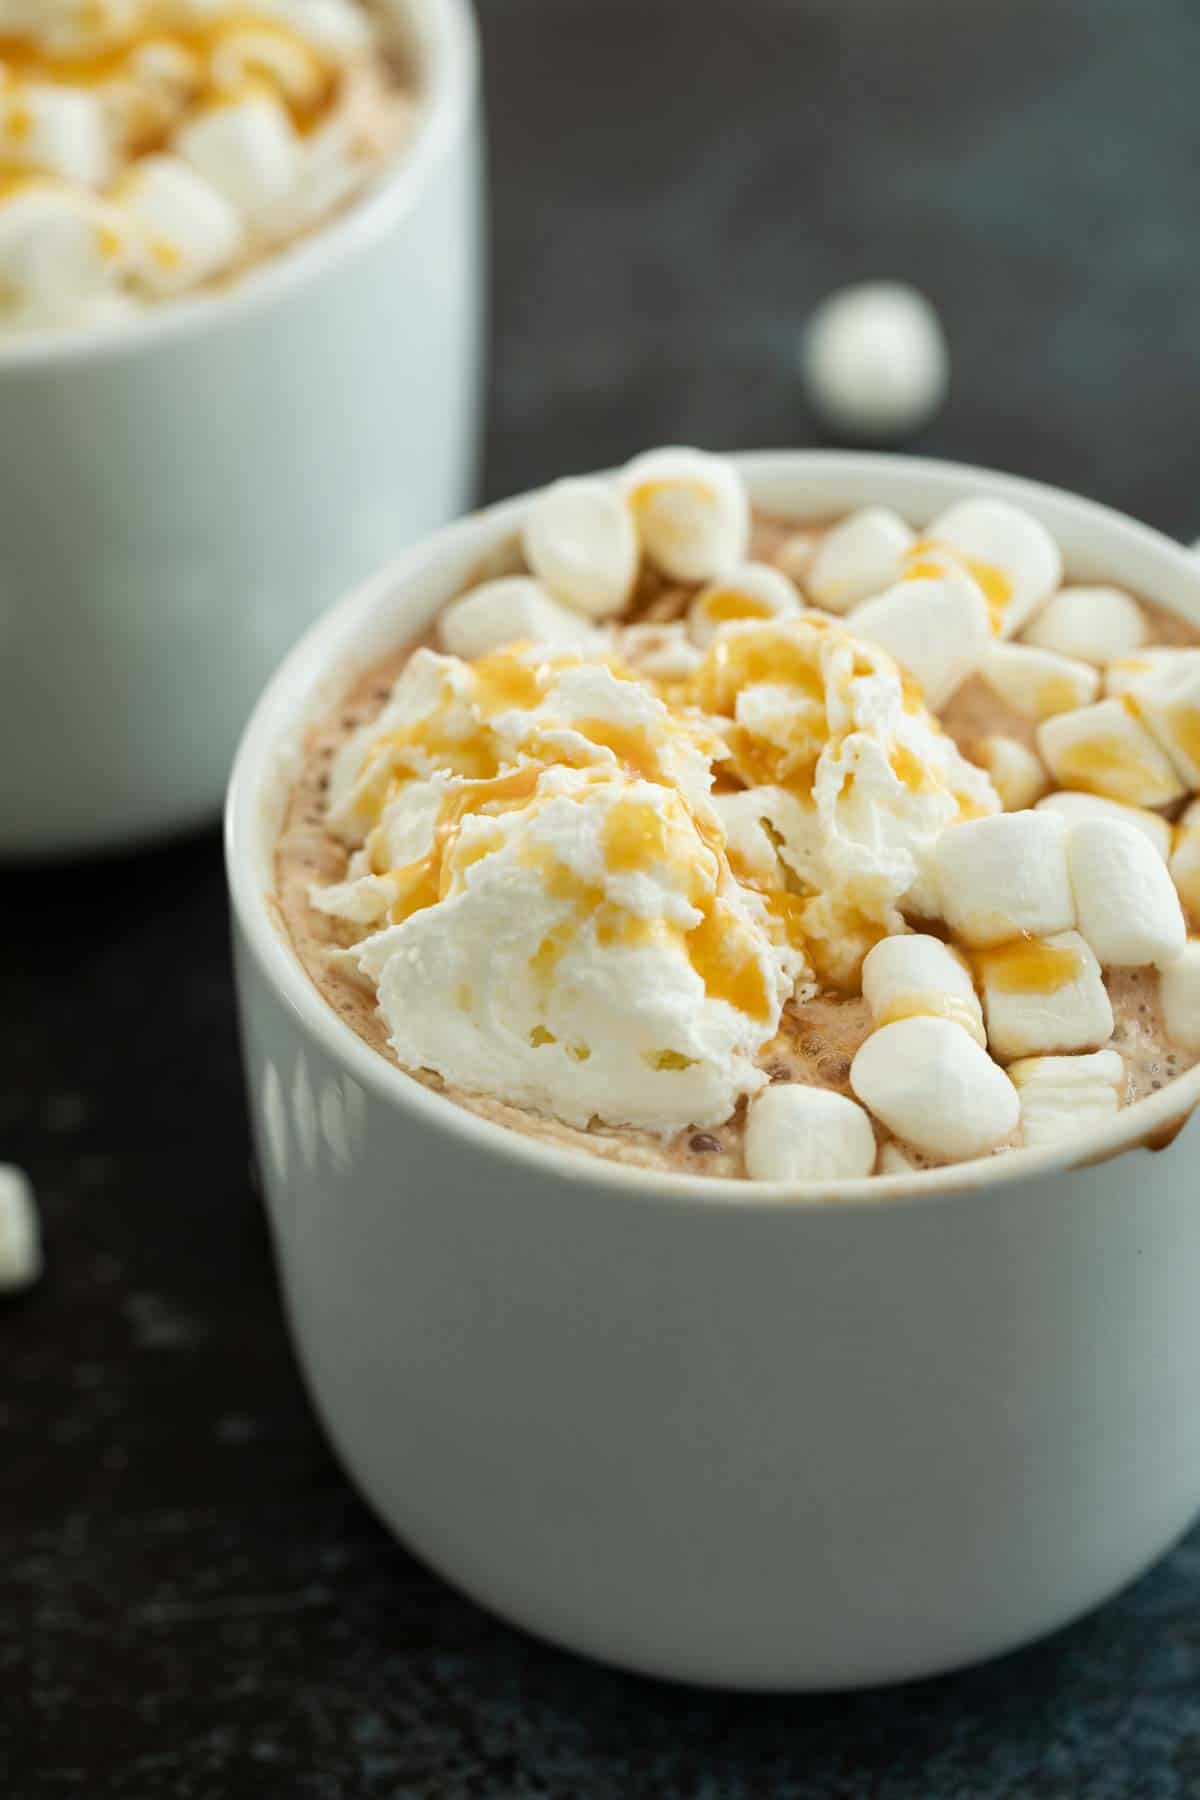 Hot Chocolate topped with Whipped Cream and Caramel